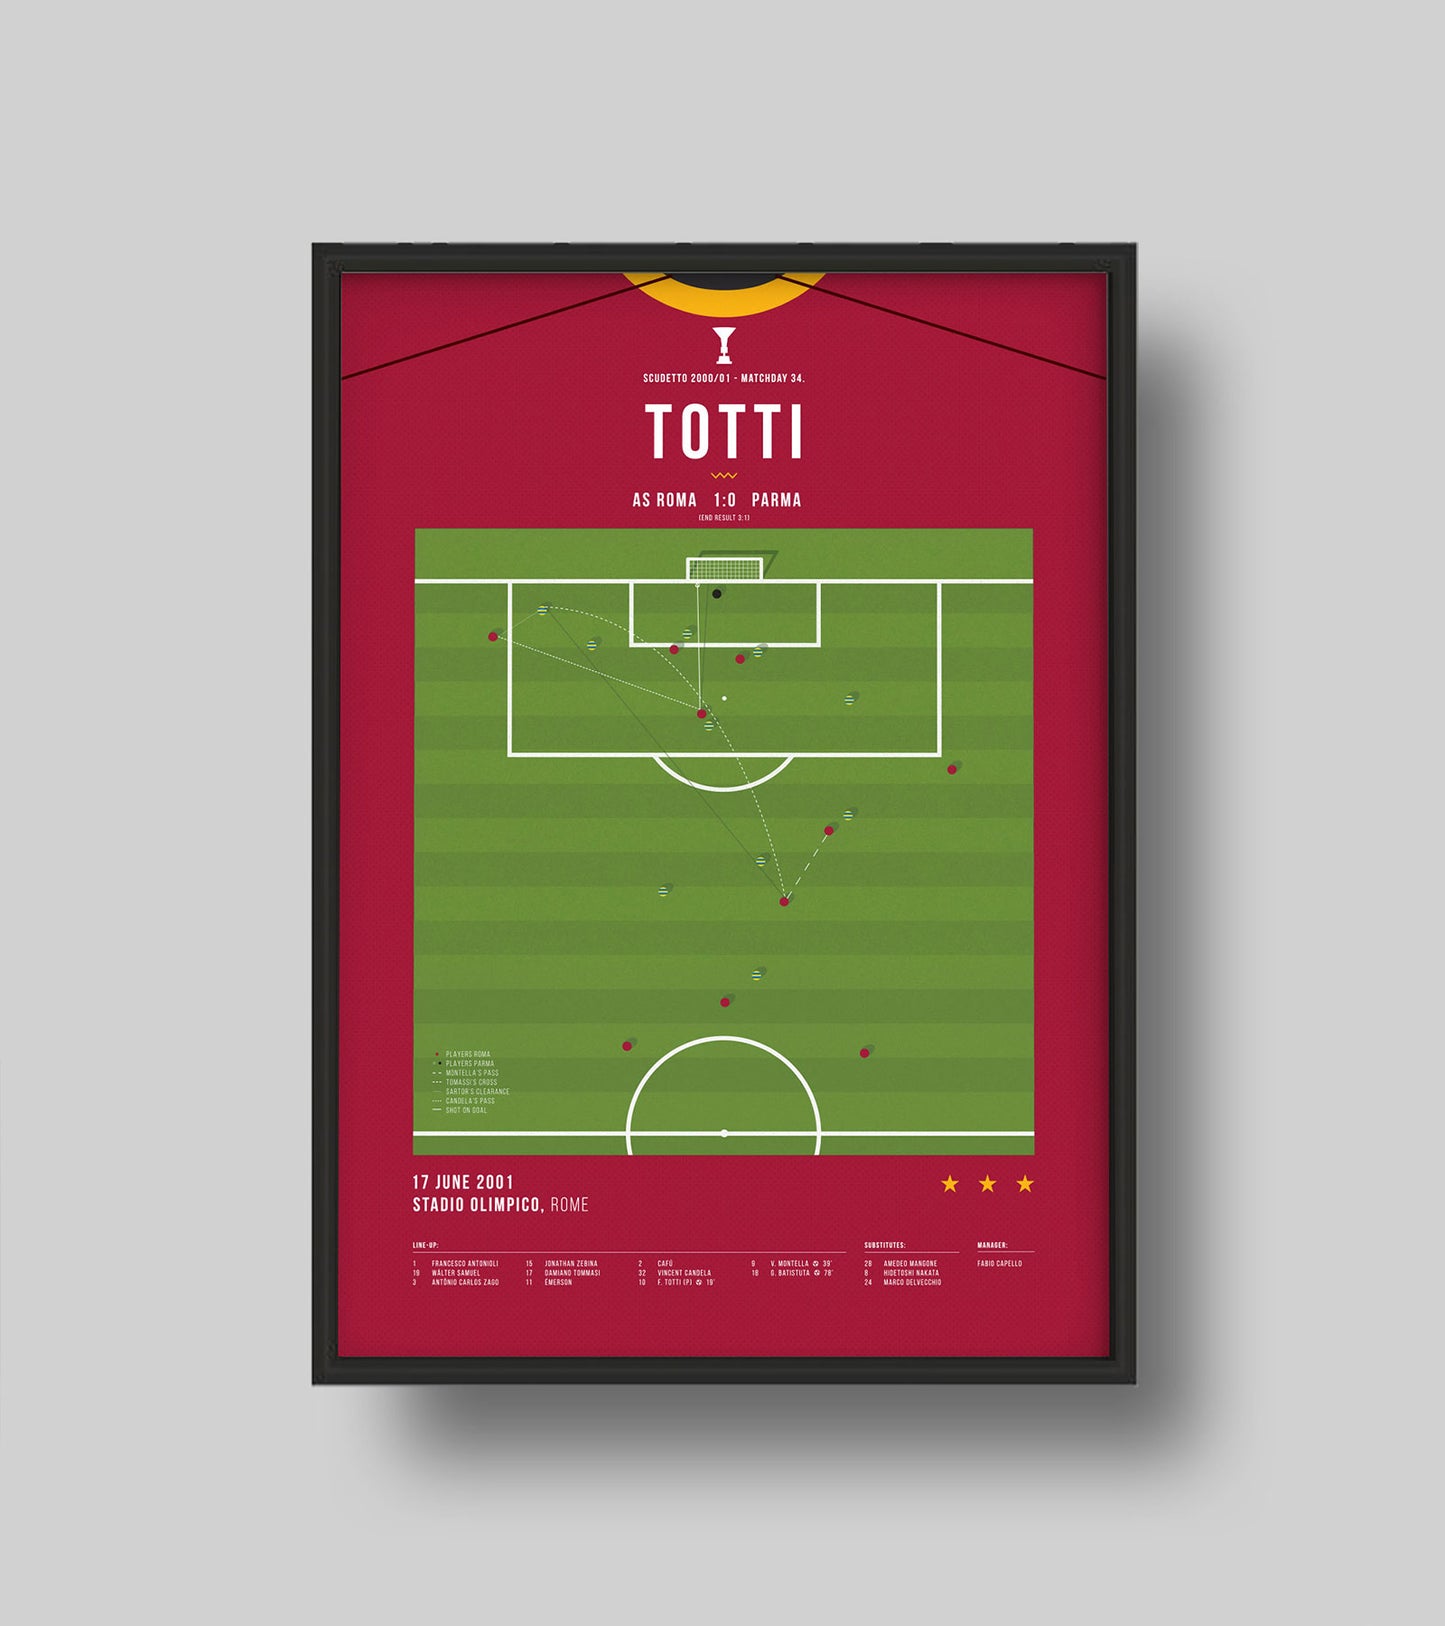 Totti's goal against Parma to clinch third Scudetto